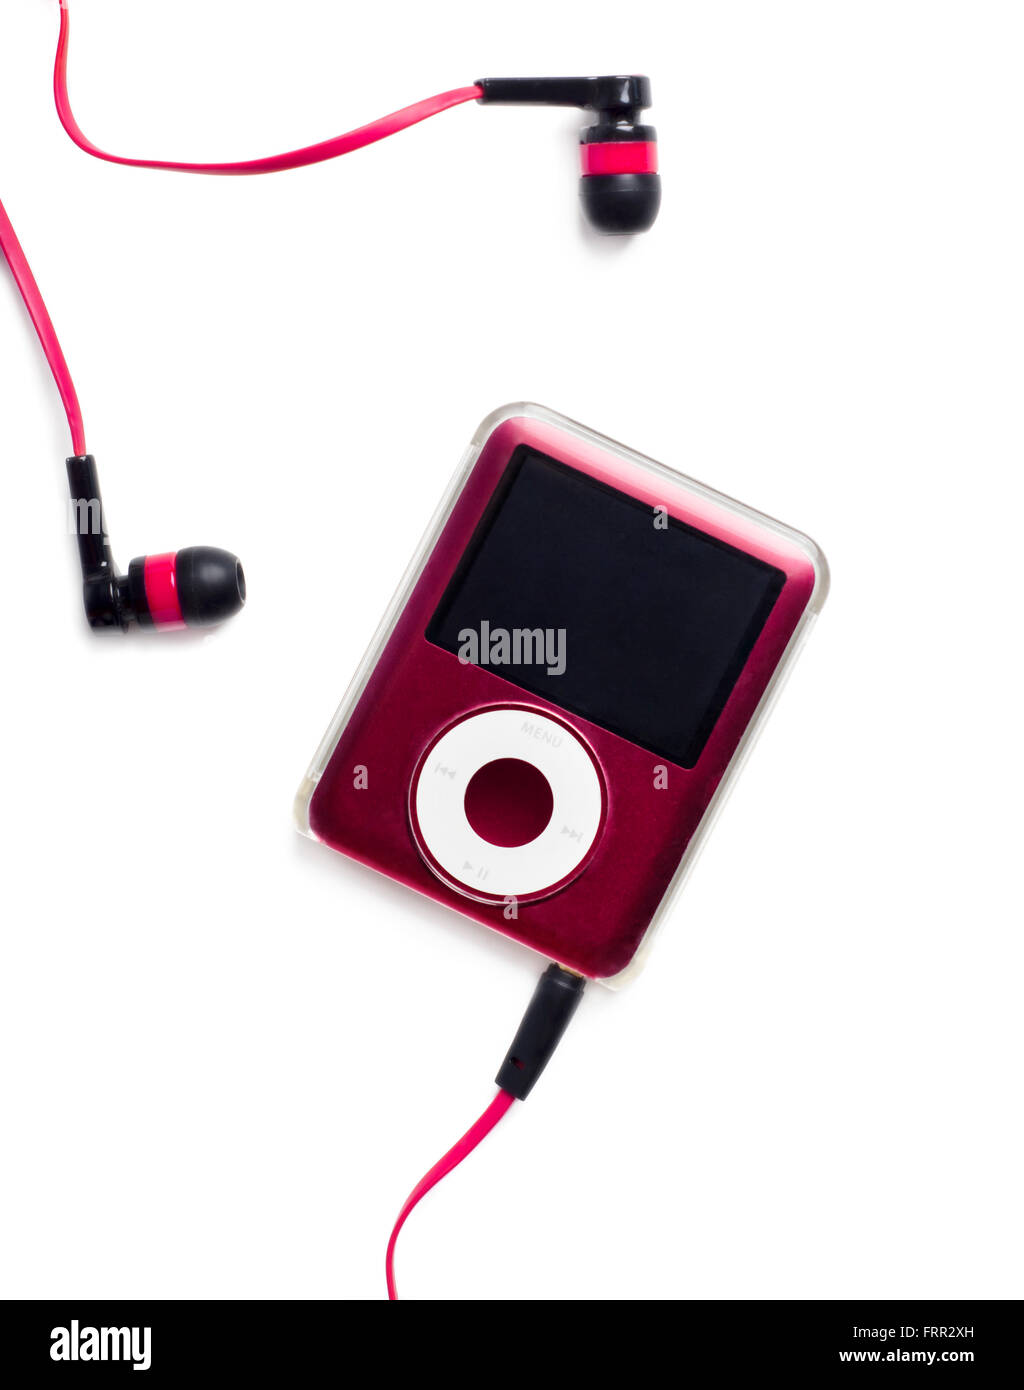 Belgrade, SERBIA - March 20, 2014: IPod Nano isolated on white background with earphones. Stock Photo